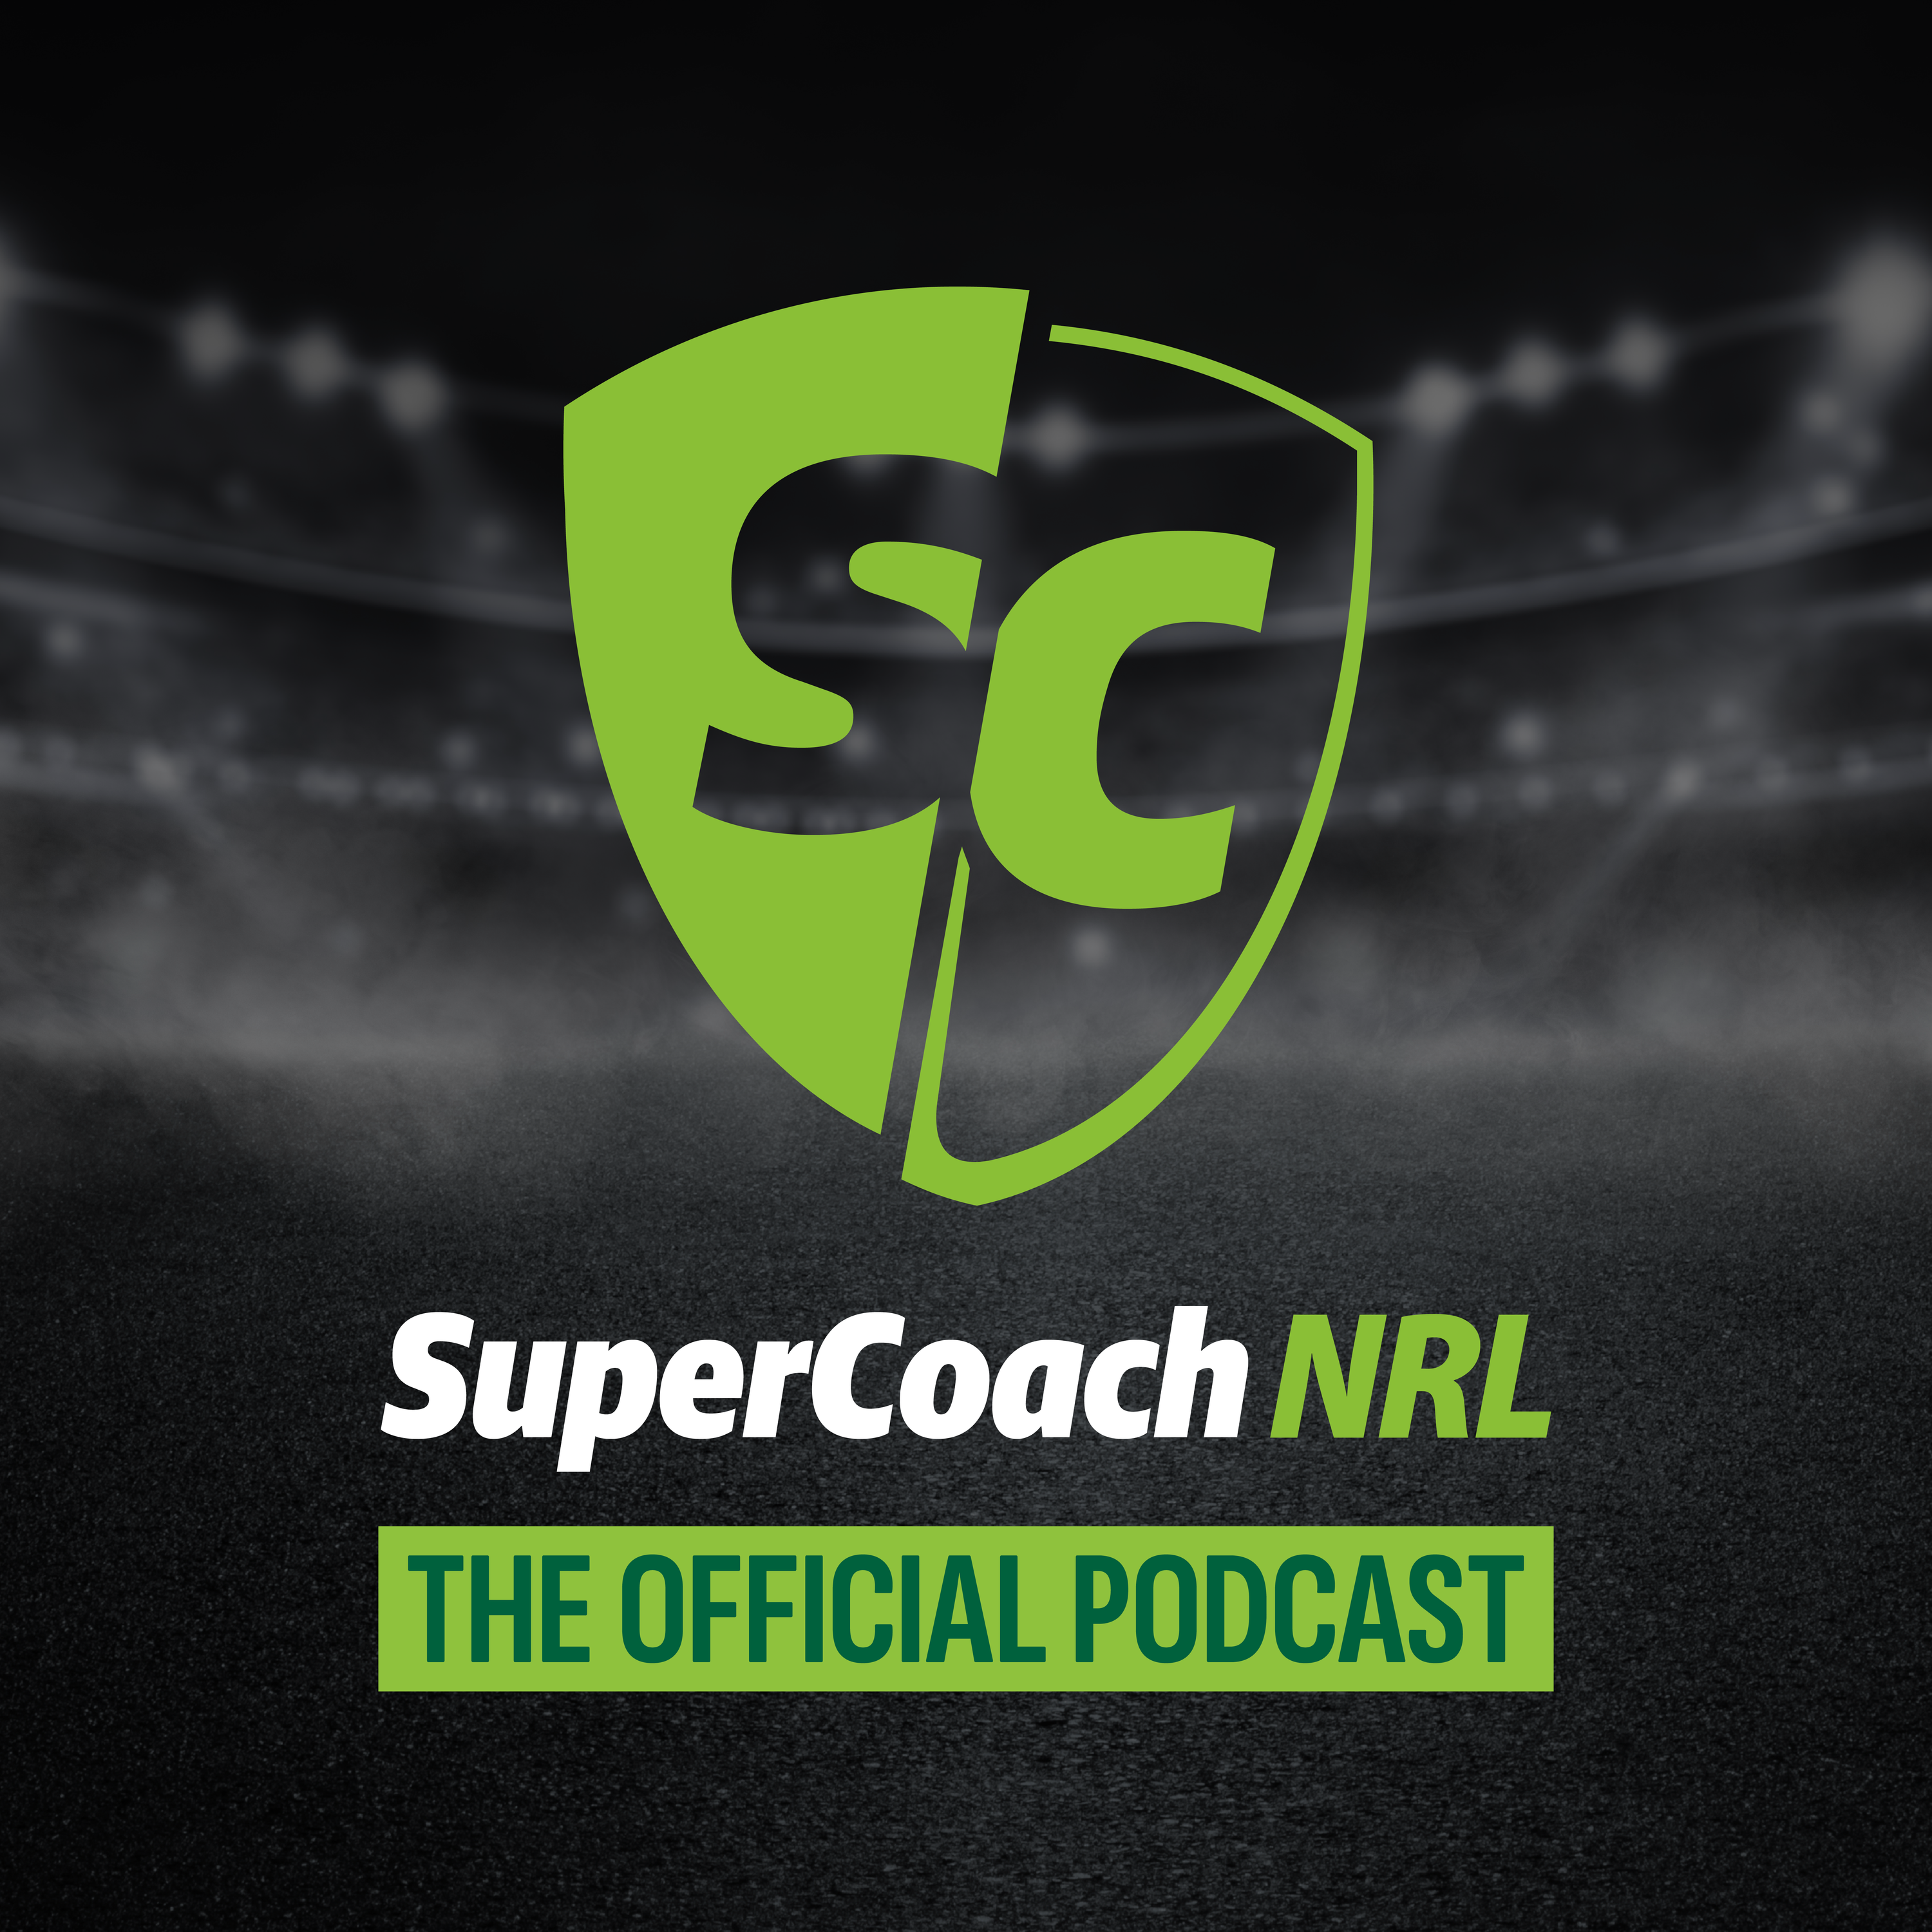 NRL SuperCoach podcast: Round 21 preview